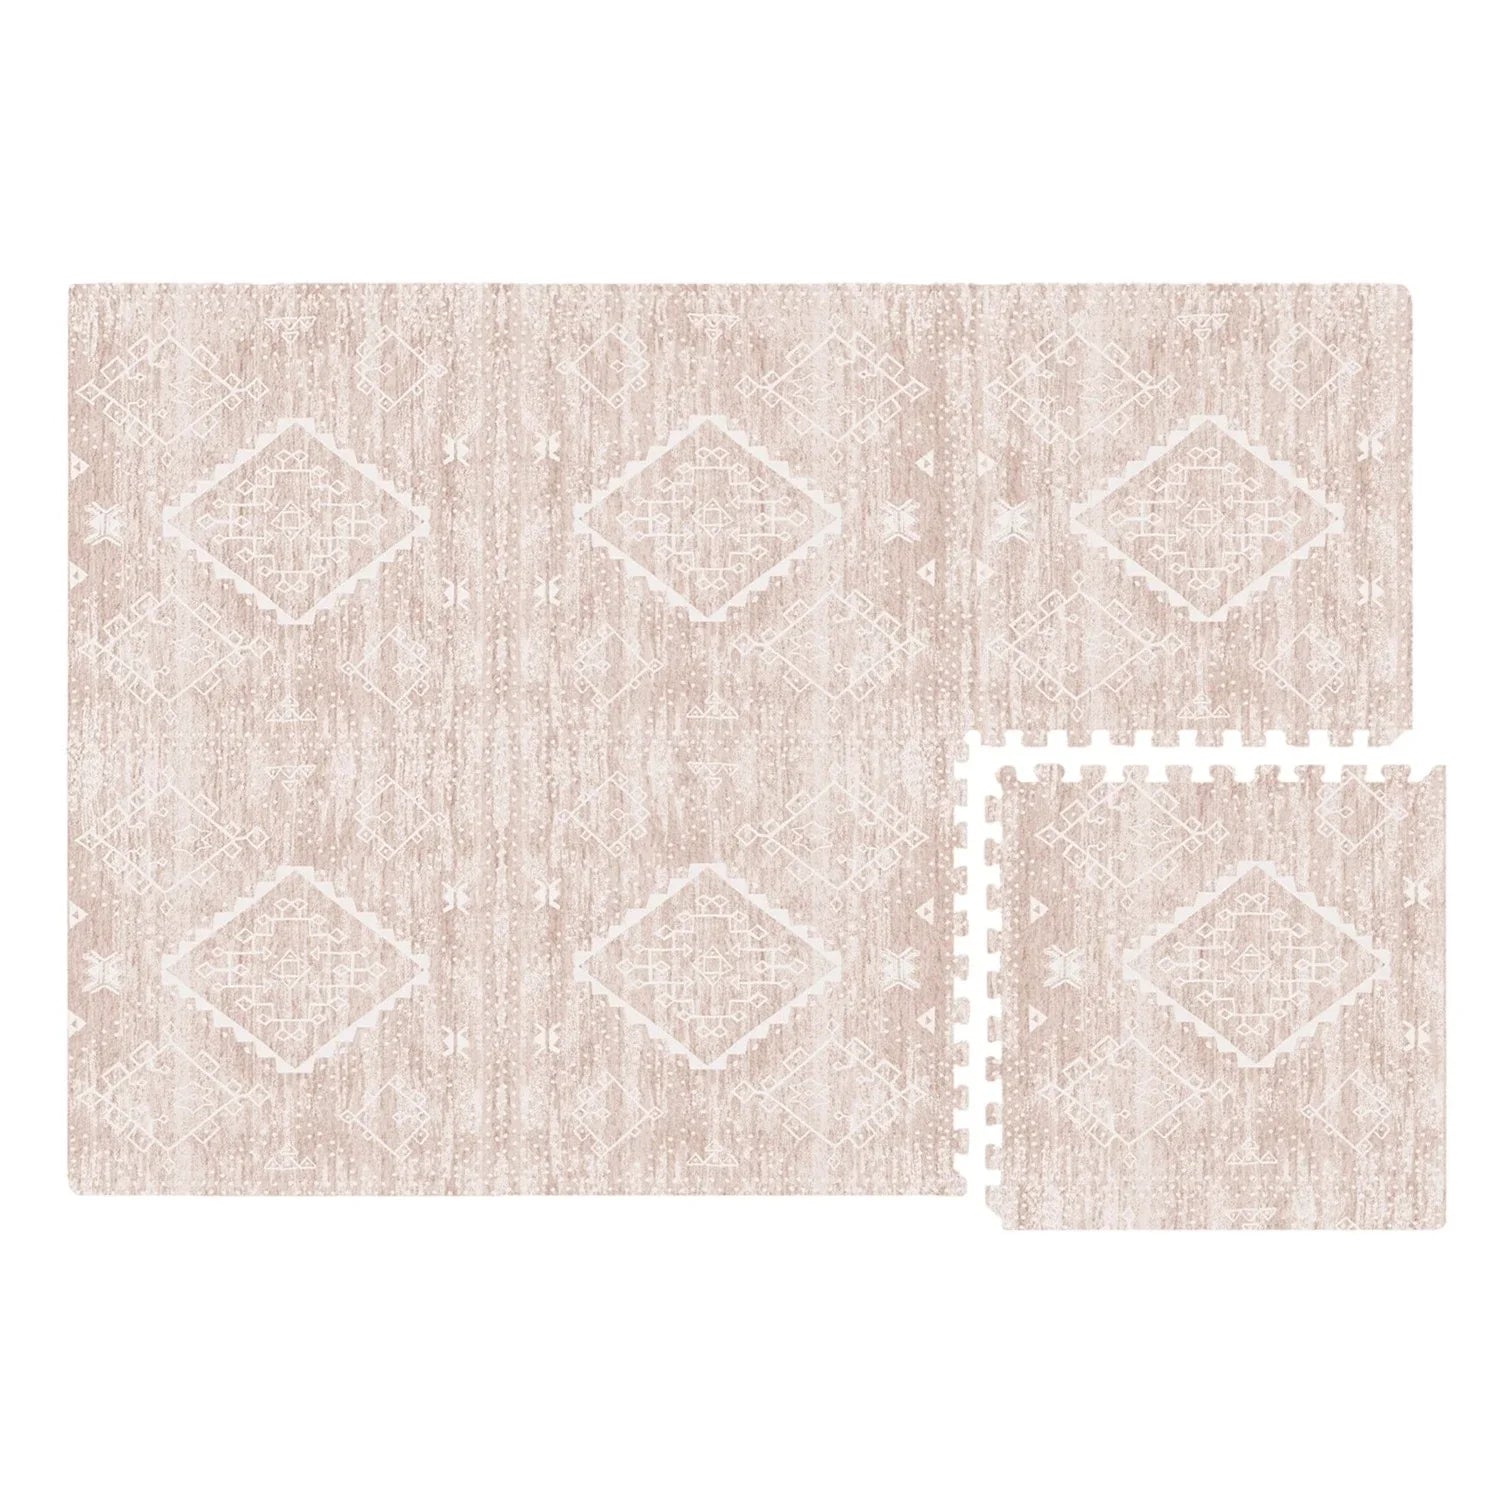 Overhead image of the Ula Sienna neutral pink minimal boho pattern play mat in size 4x6